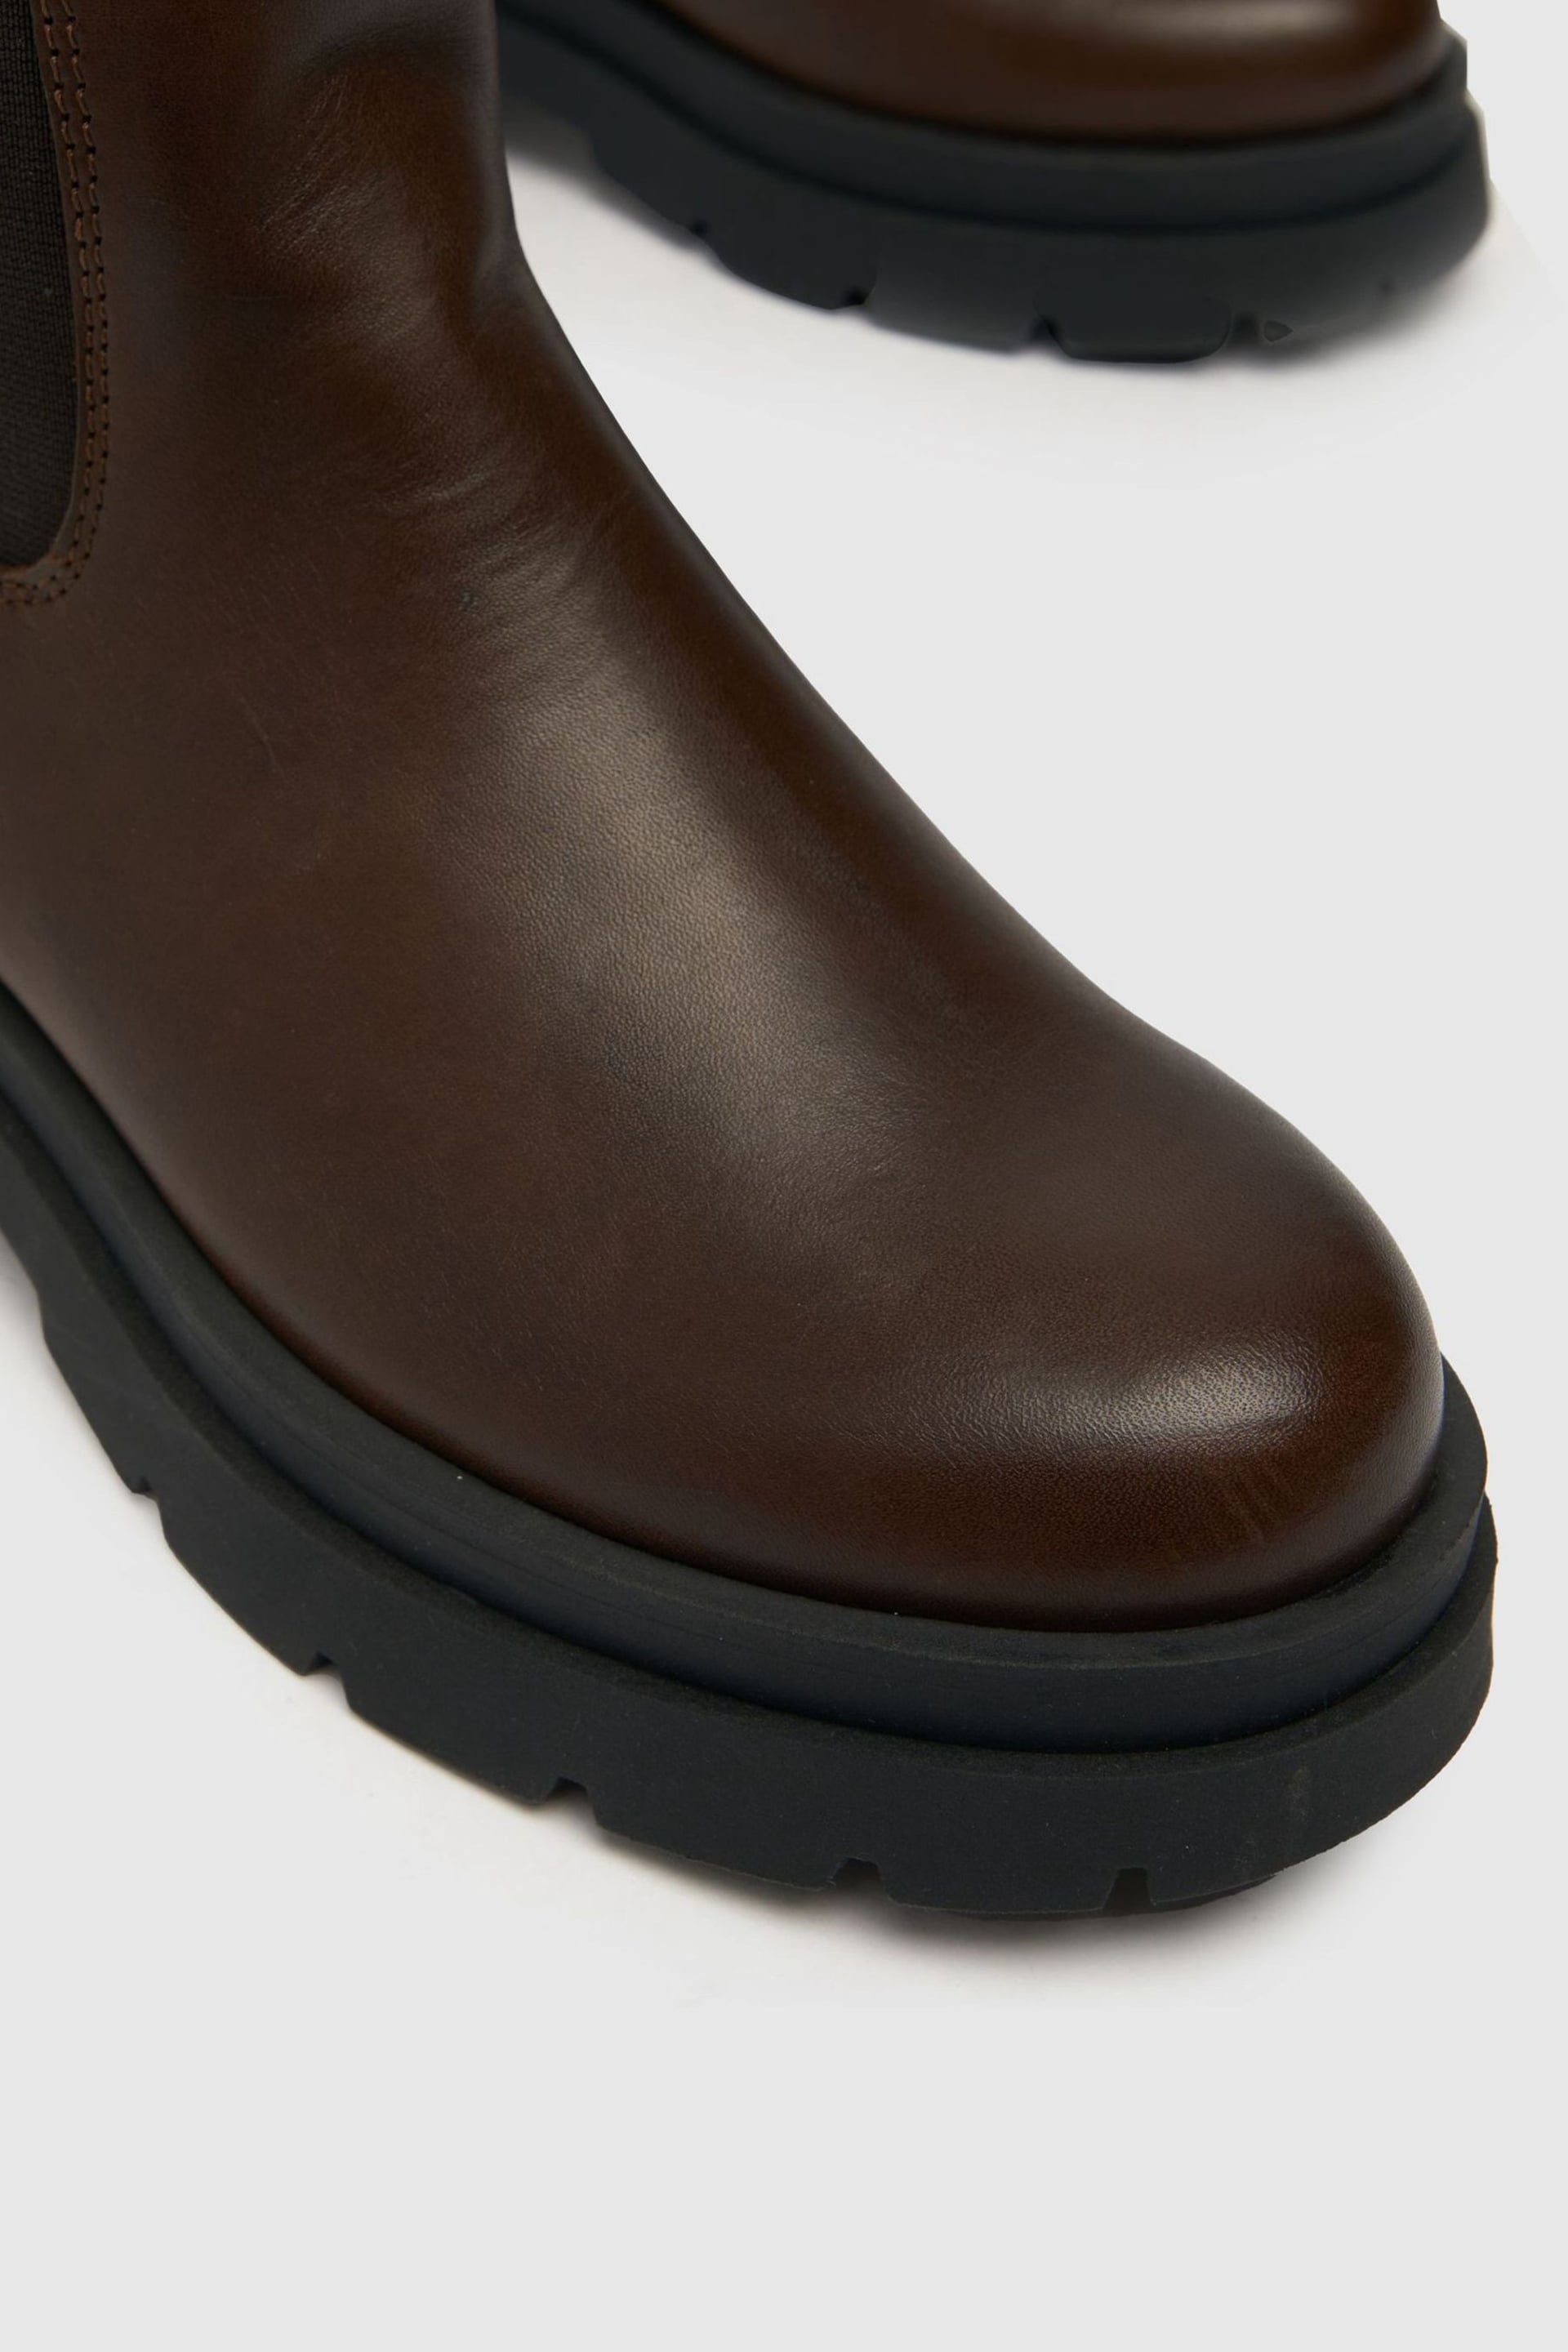 Schuh August High Cut Chelsea Brown Boots - Image 4 of 4